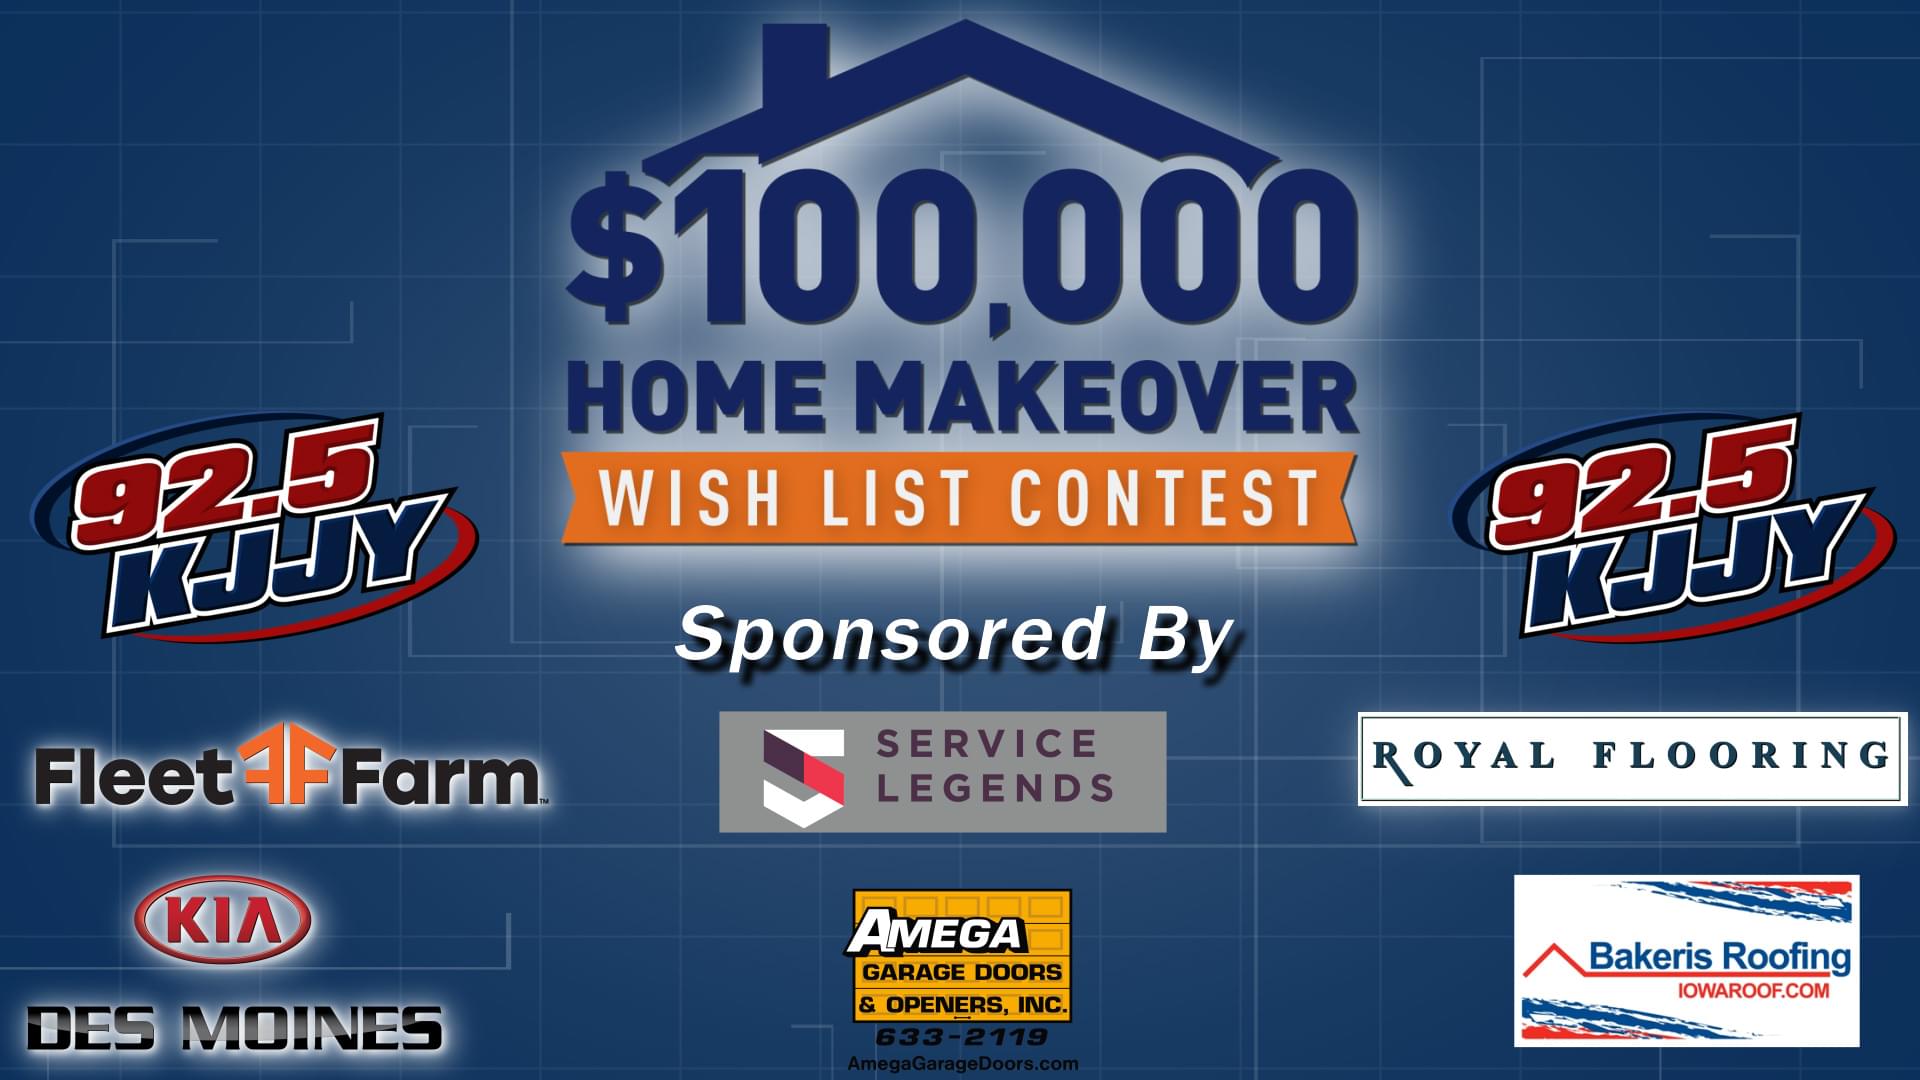 Home Makeover Wish List Contest